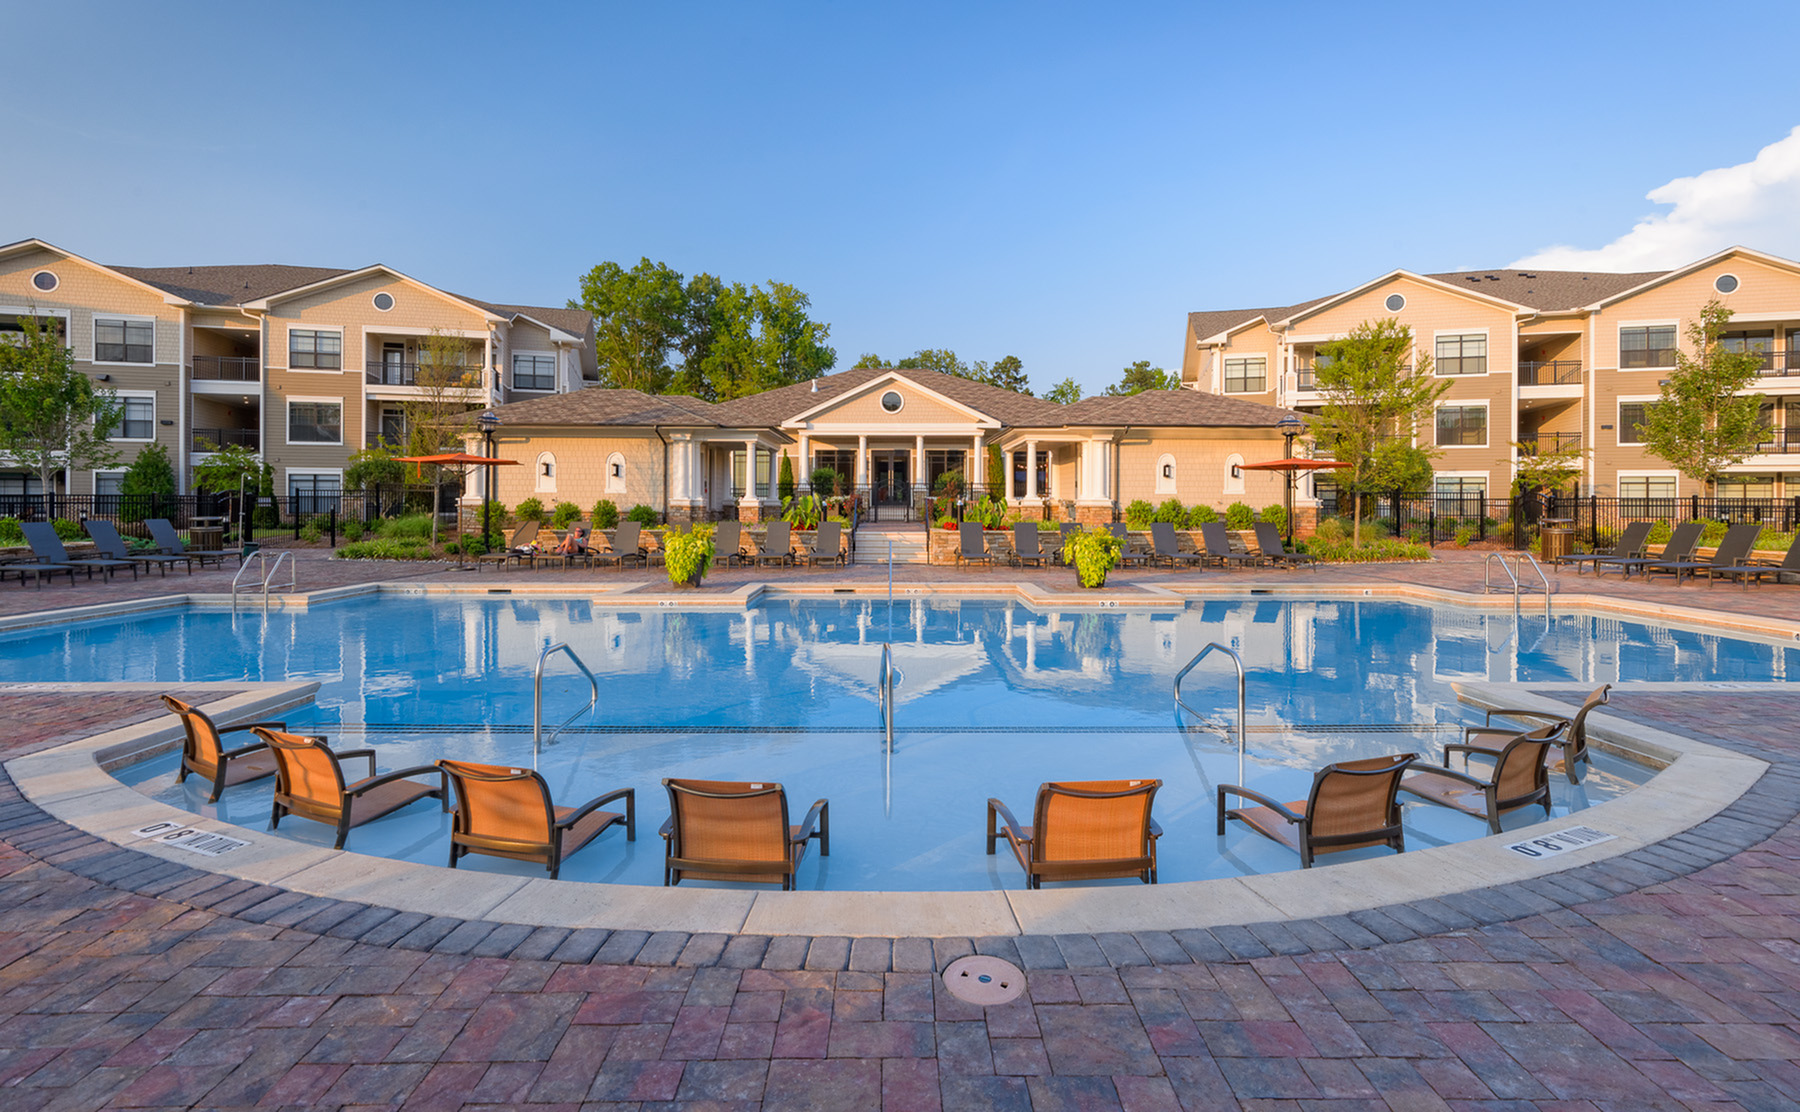 View of Pool Area, Showing Loungers, Fenced-In Area, and Adjacent Resident Clubhouse at Heights at Meridian Apartments